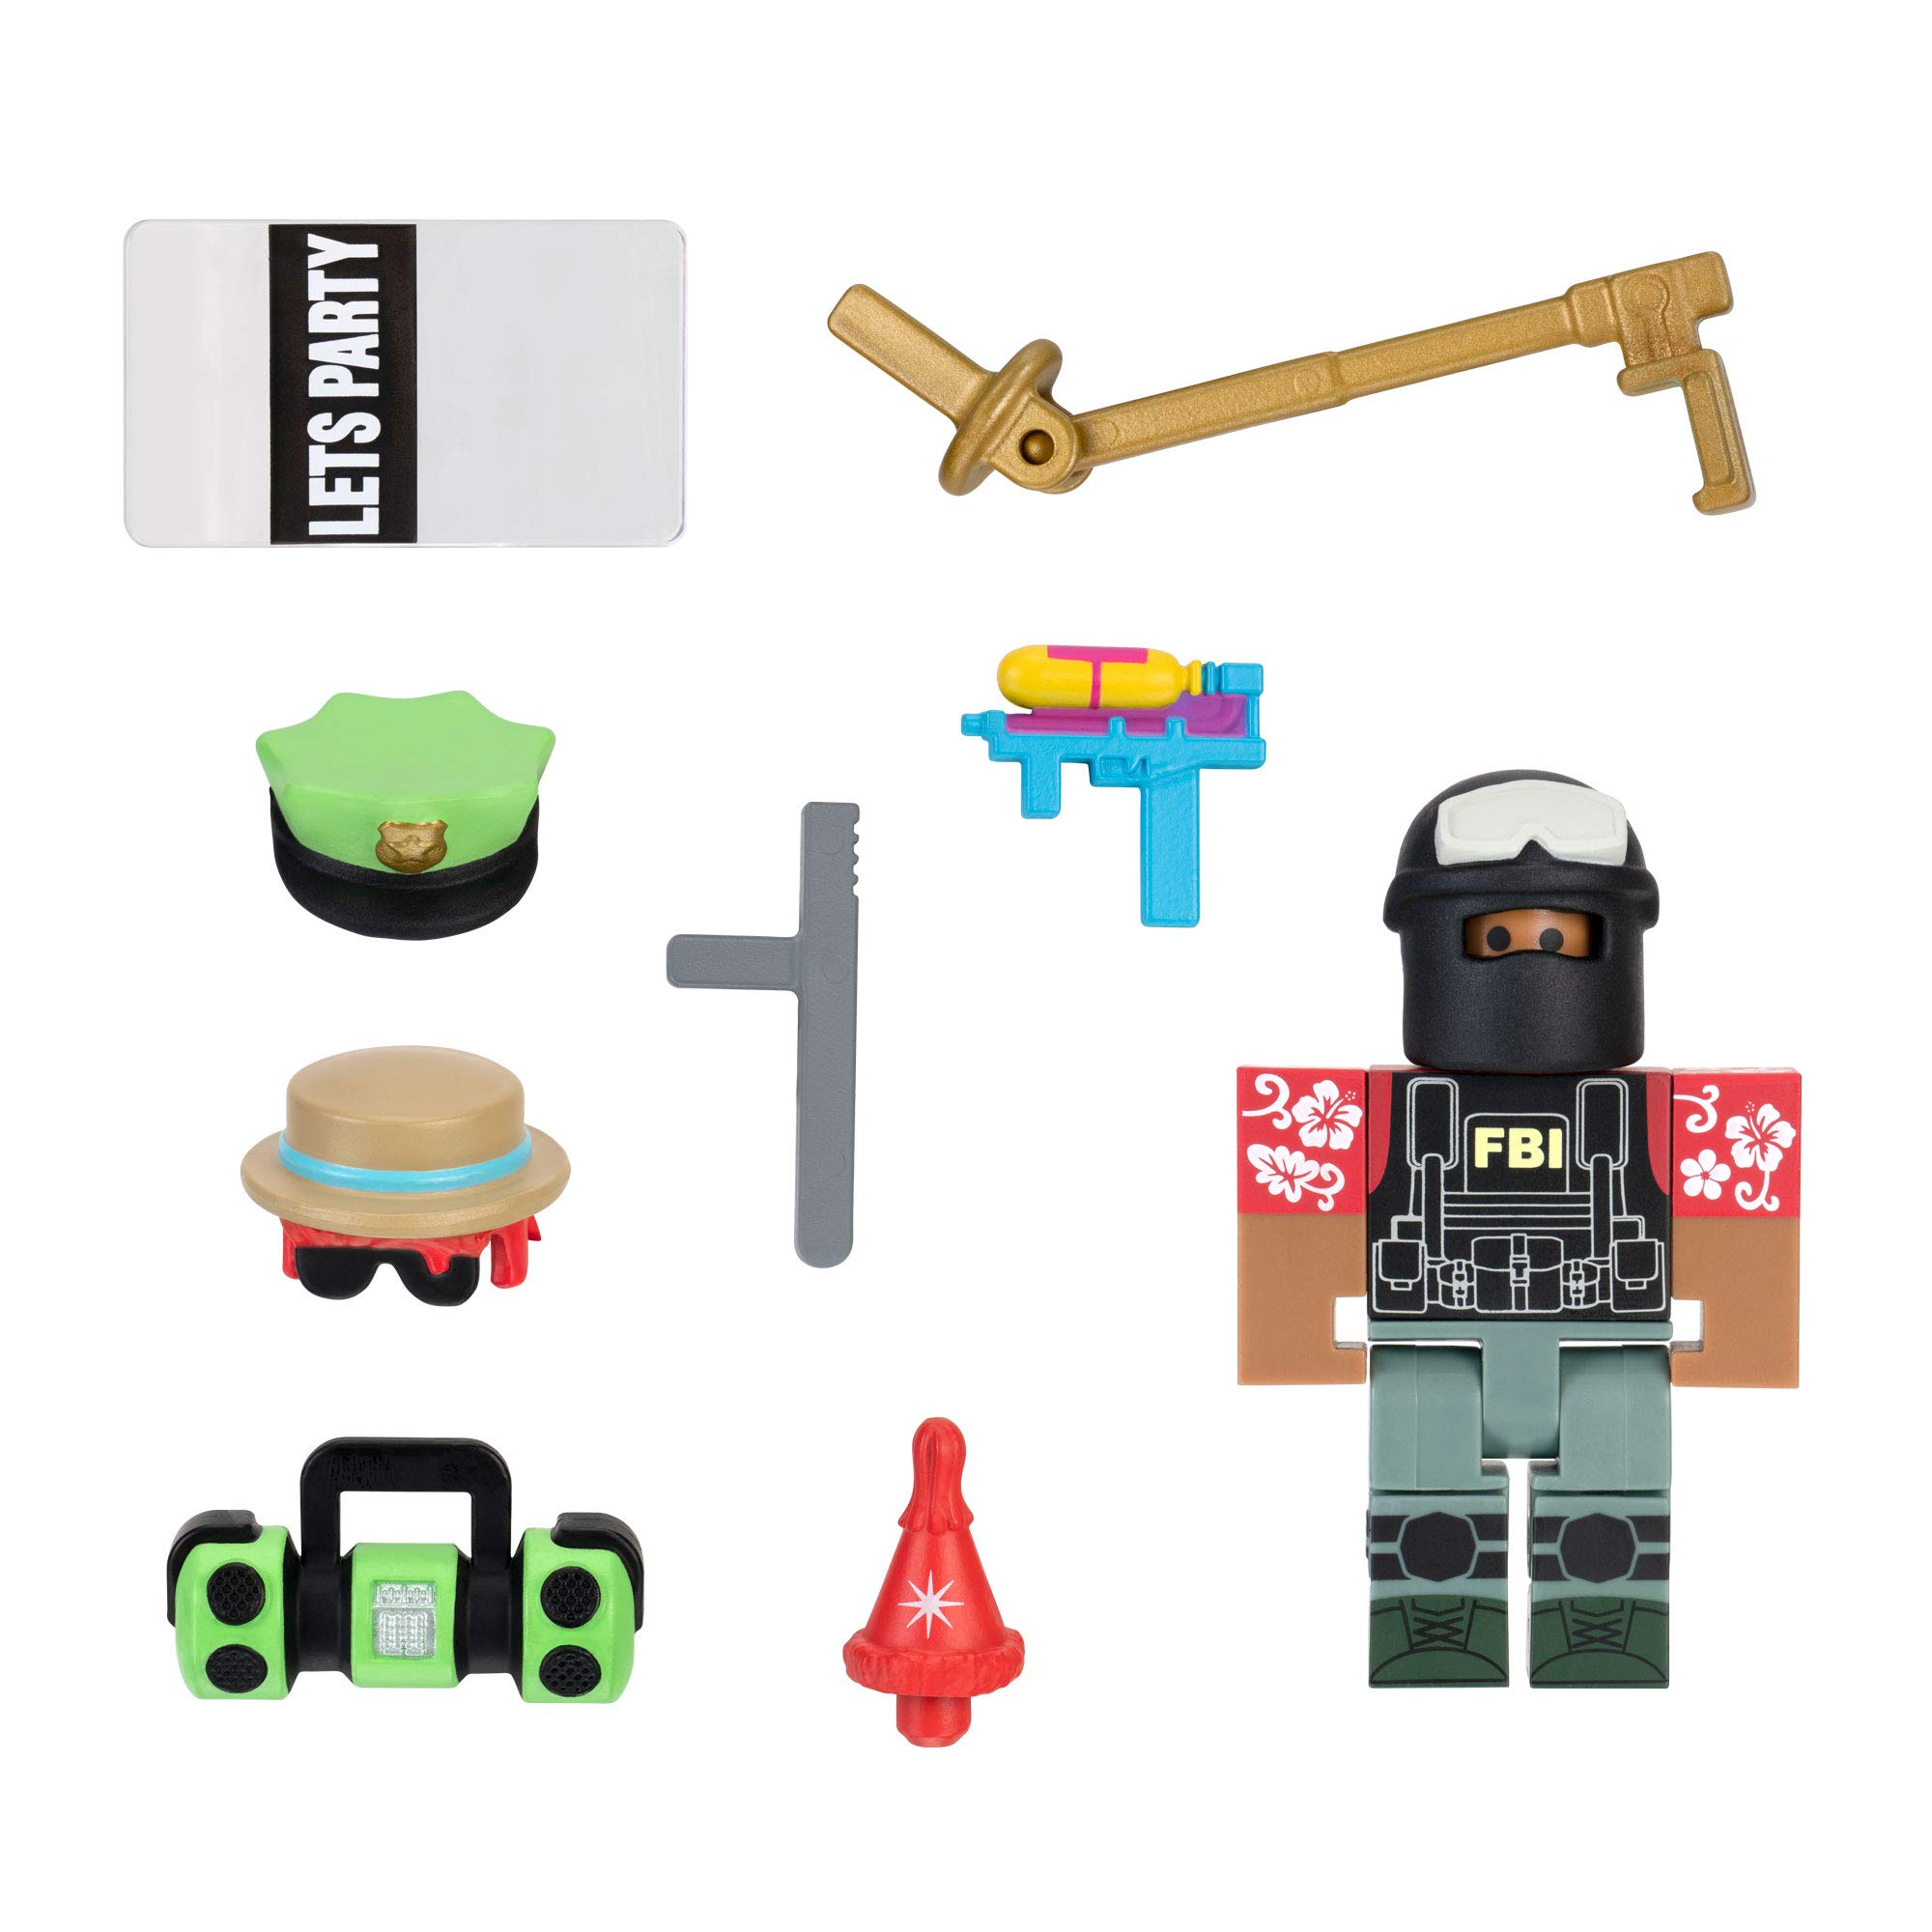 Amazoncom Roblox Avatar Shop Series Collection  Candy Avatar Figure Pack  Includes Exclusive Virtual Item  Toys  Games